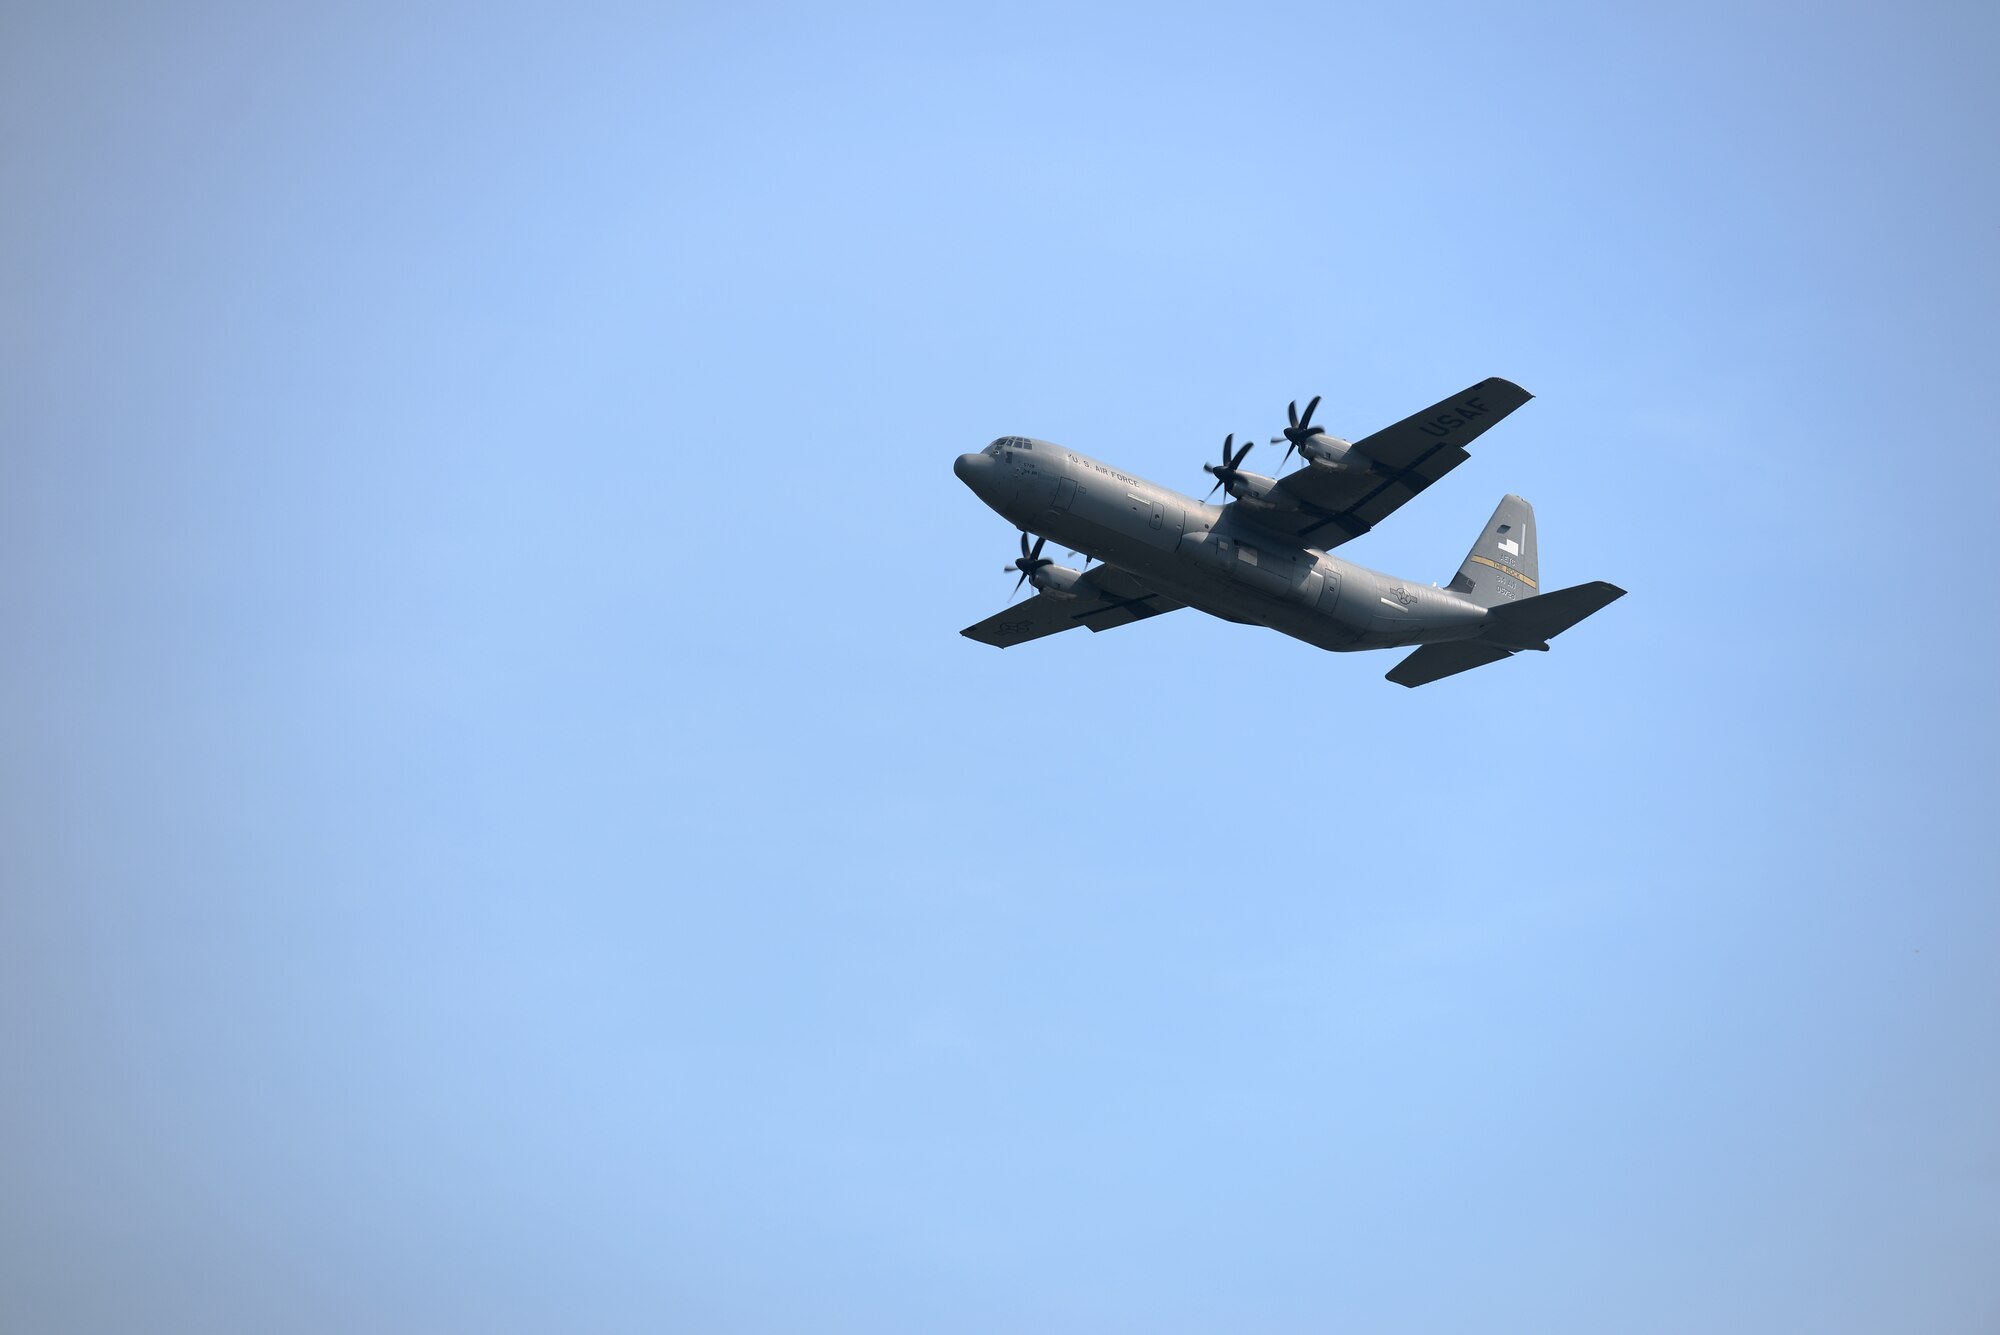 A C-130J aircraft flies in the sky going from right to left just after takeoff